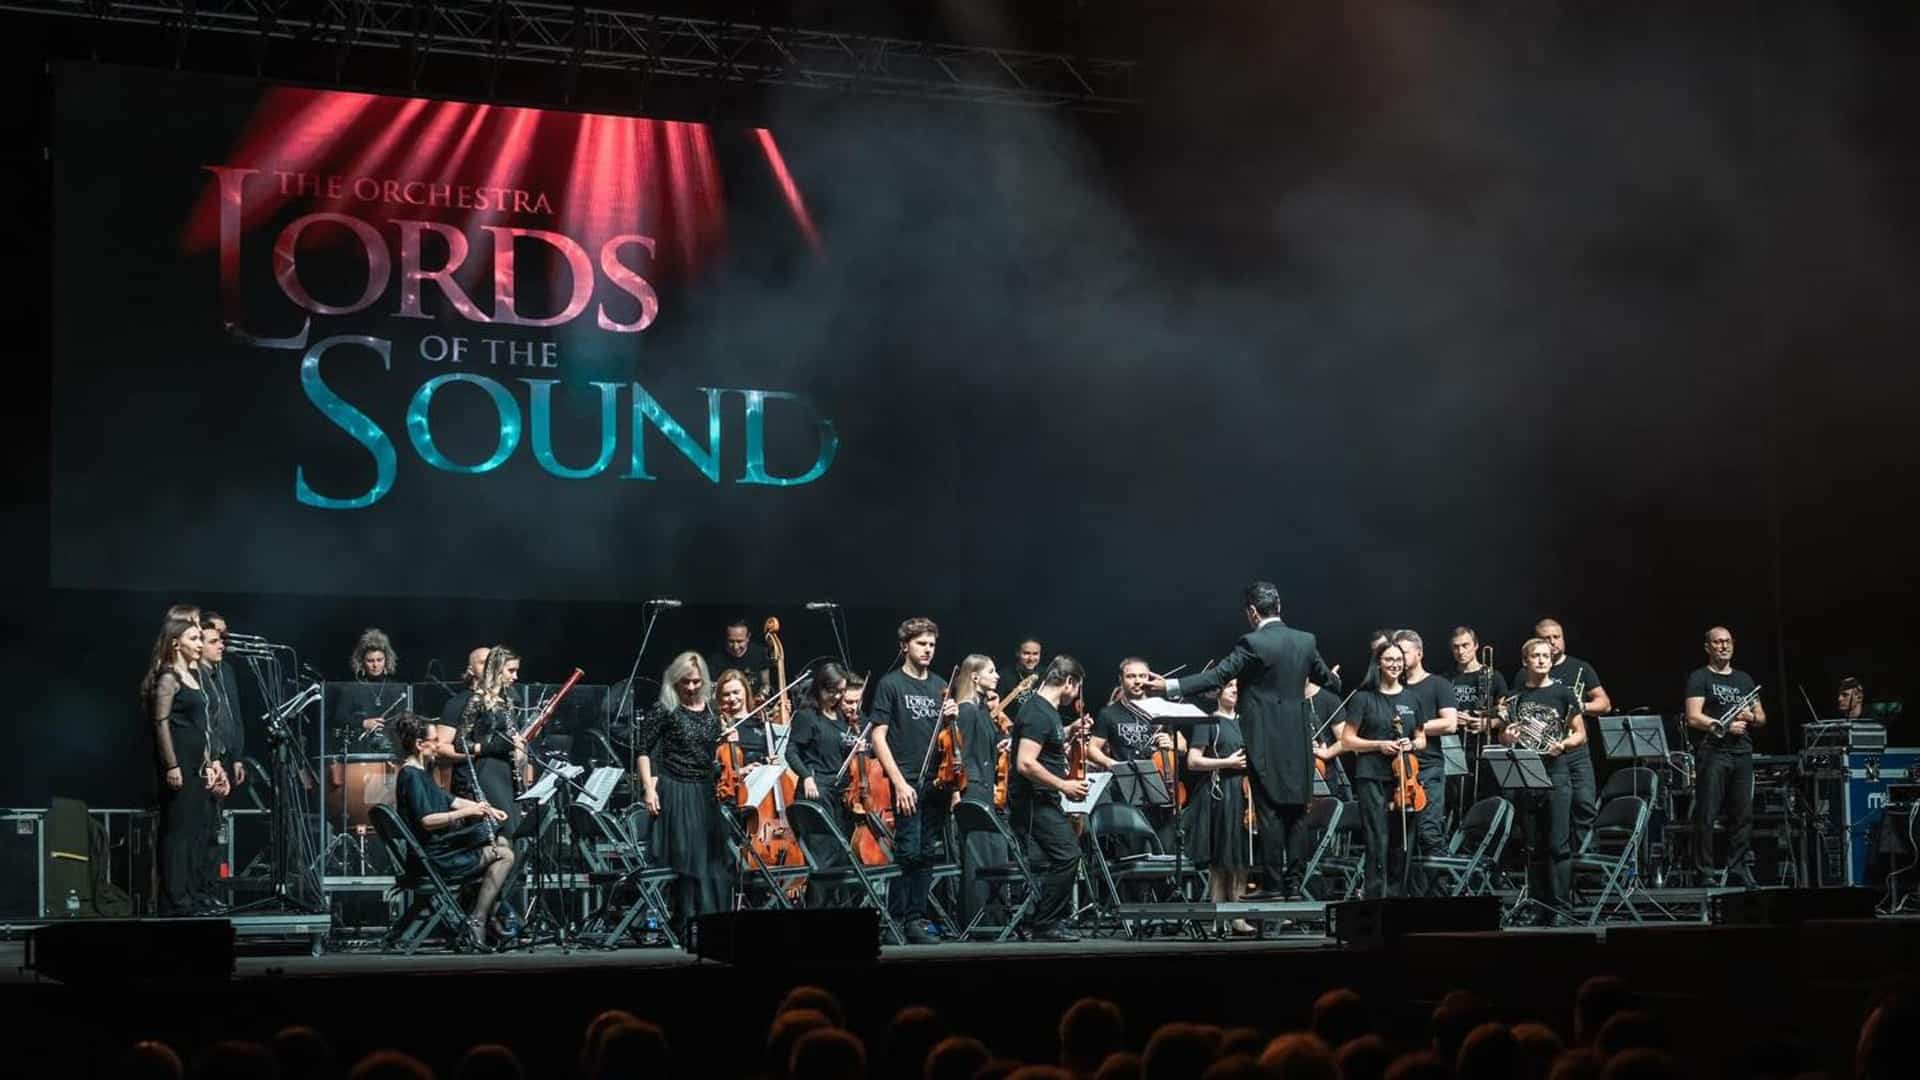 LORDS OF THE SOUND The Music Of Hans Zimmer